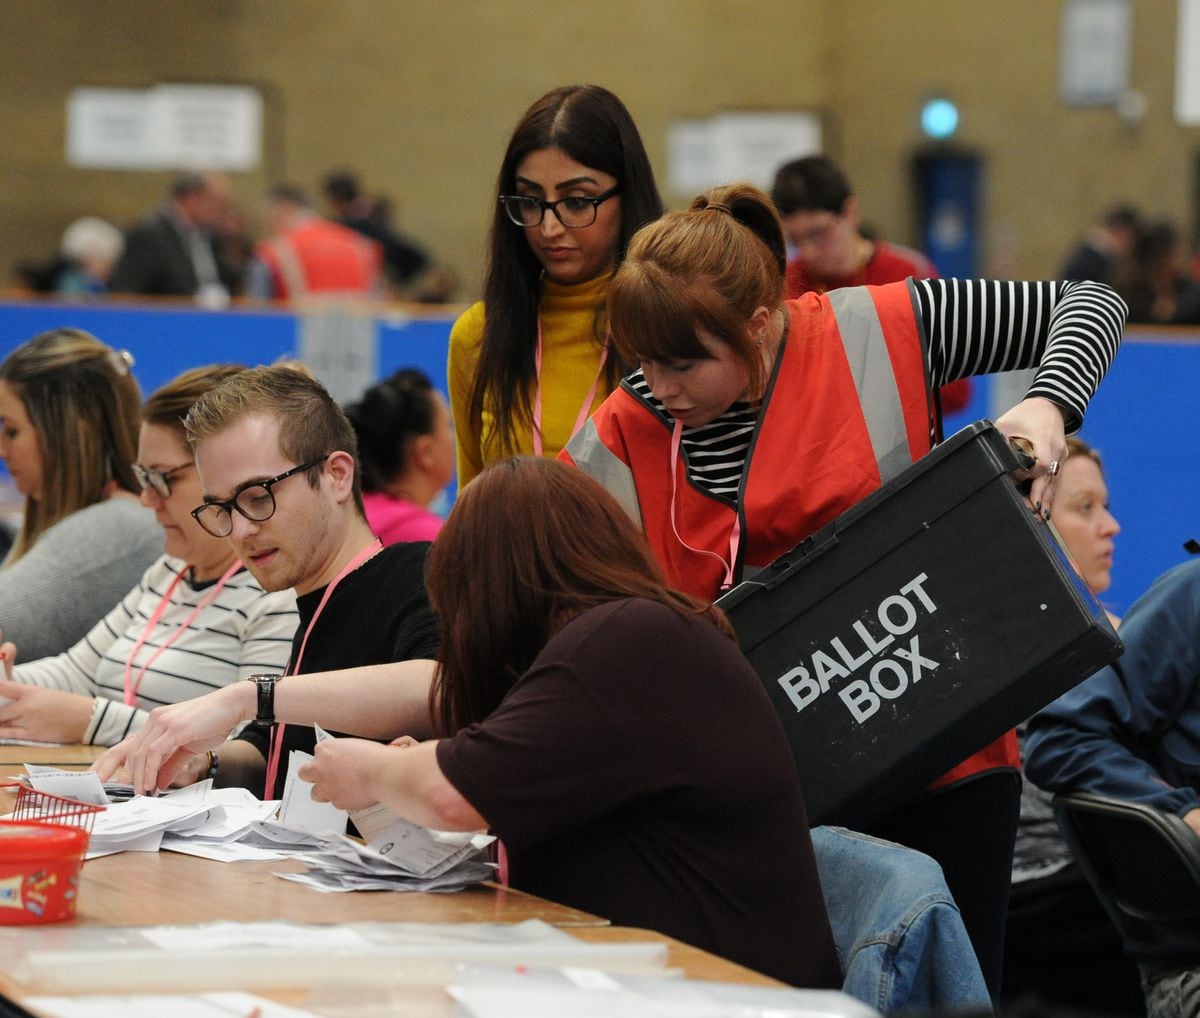 Votes are counted at Aldersley Leisure Village